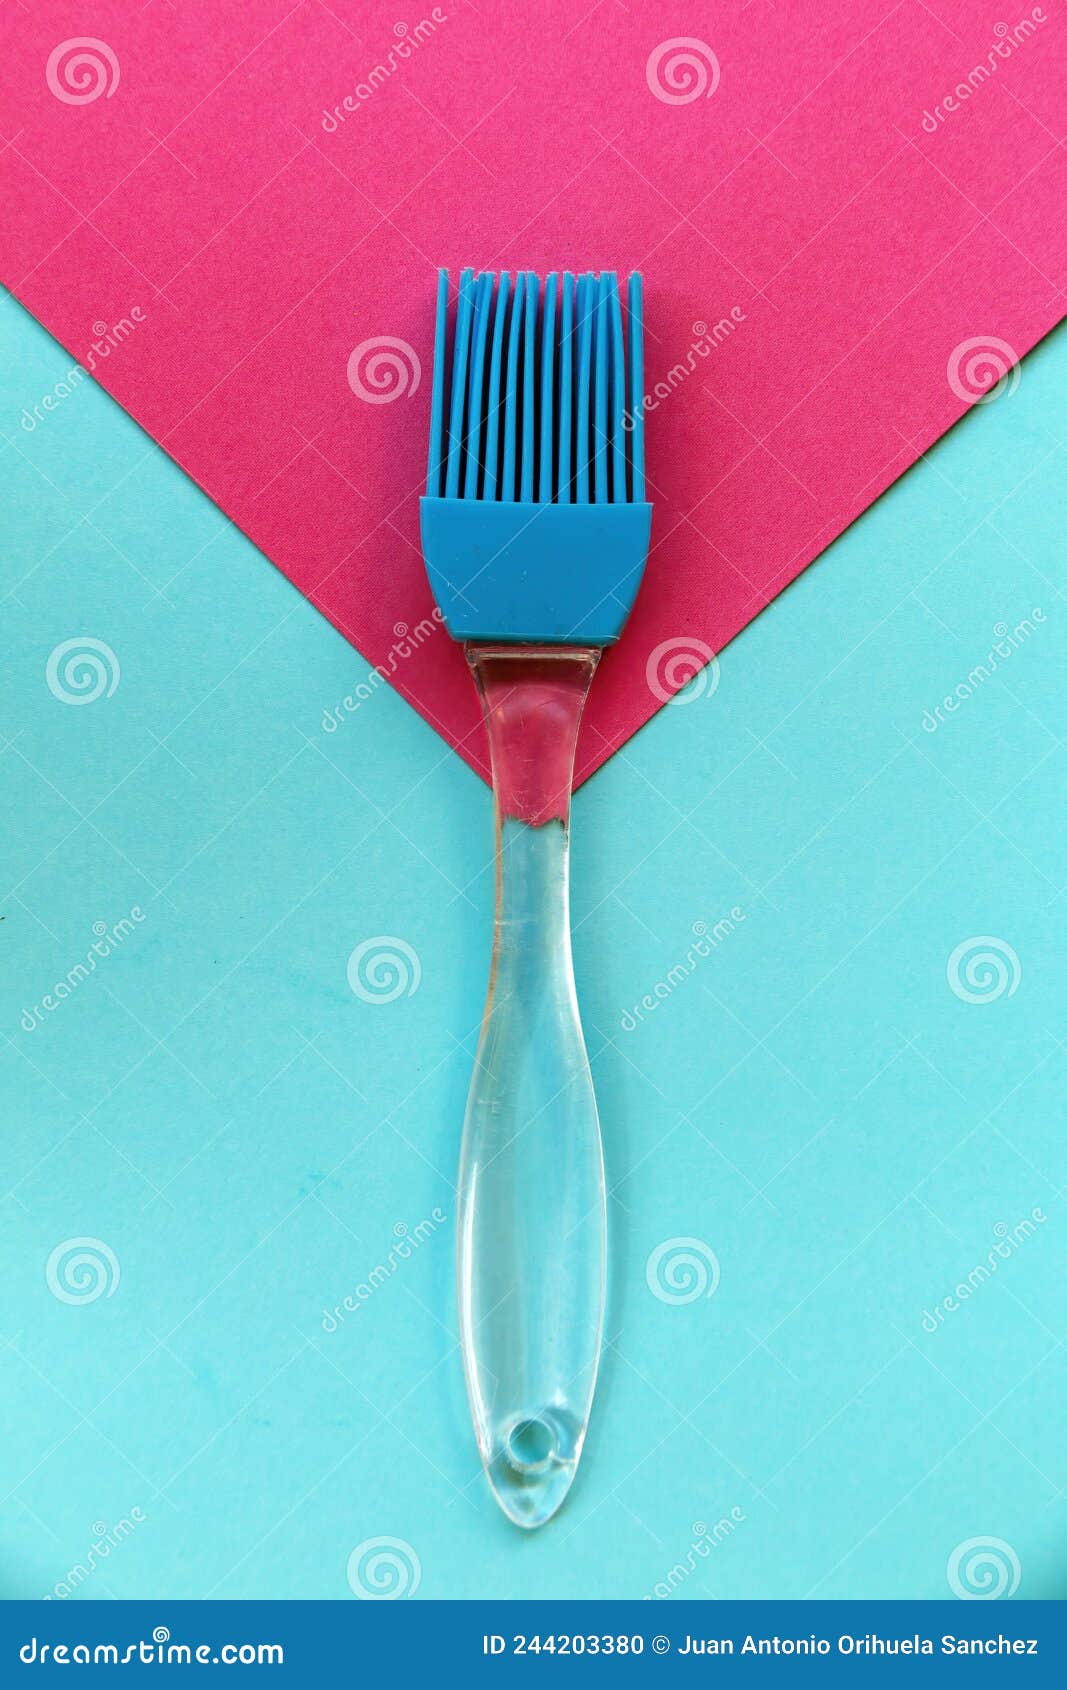 silicone brush on blue and pink geometric background